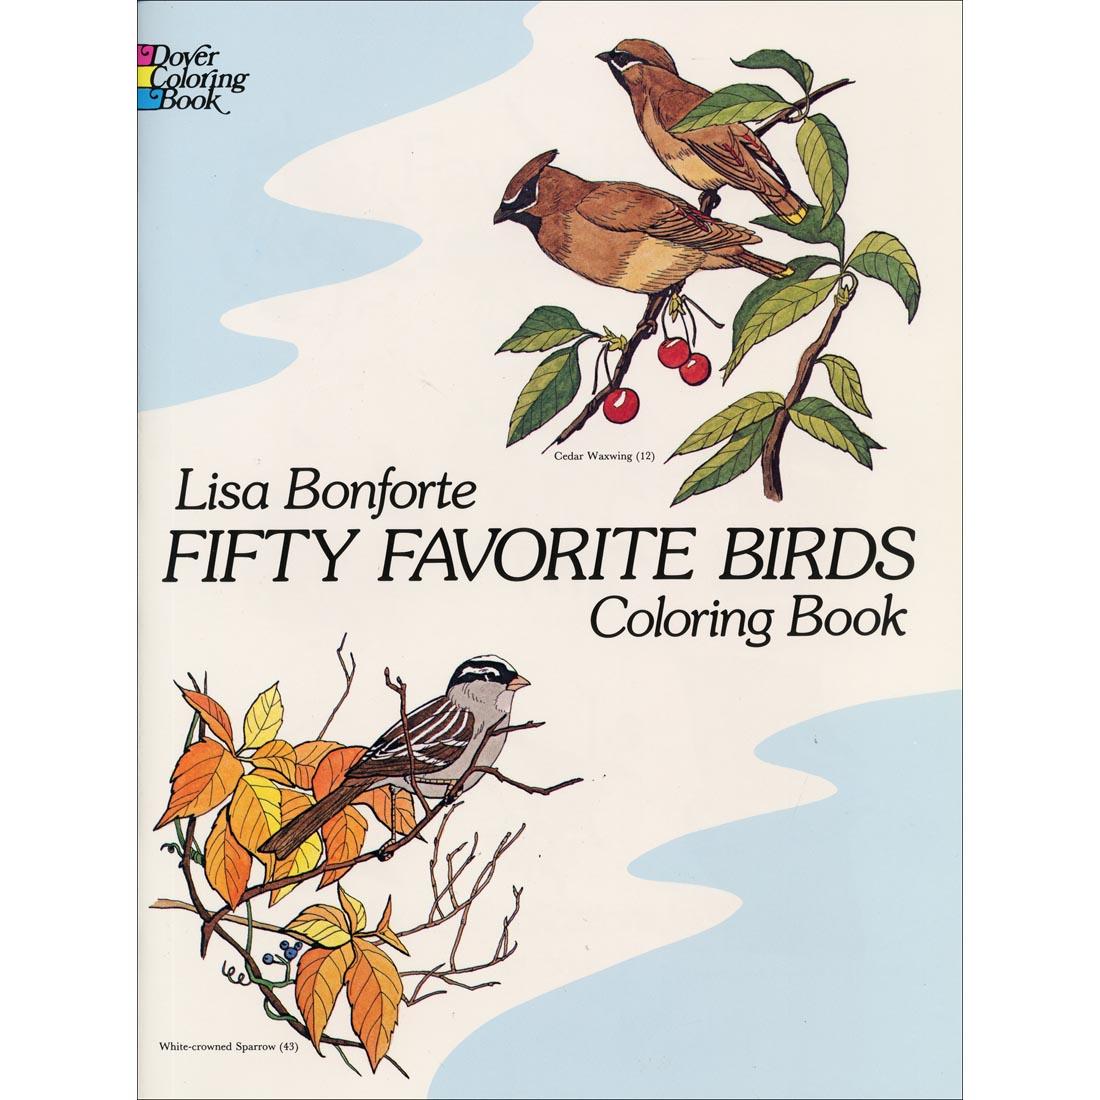 Fifty Favorite Birds Coloring Book by Dover